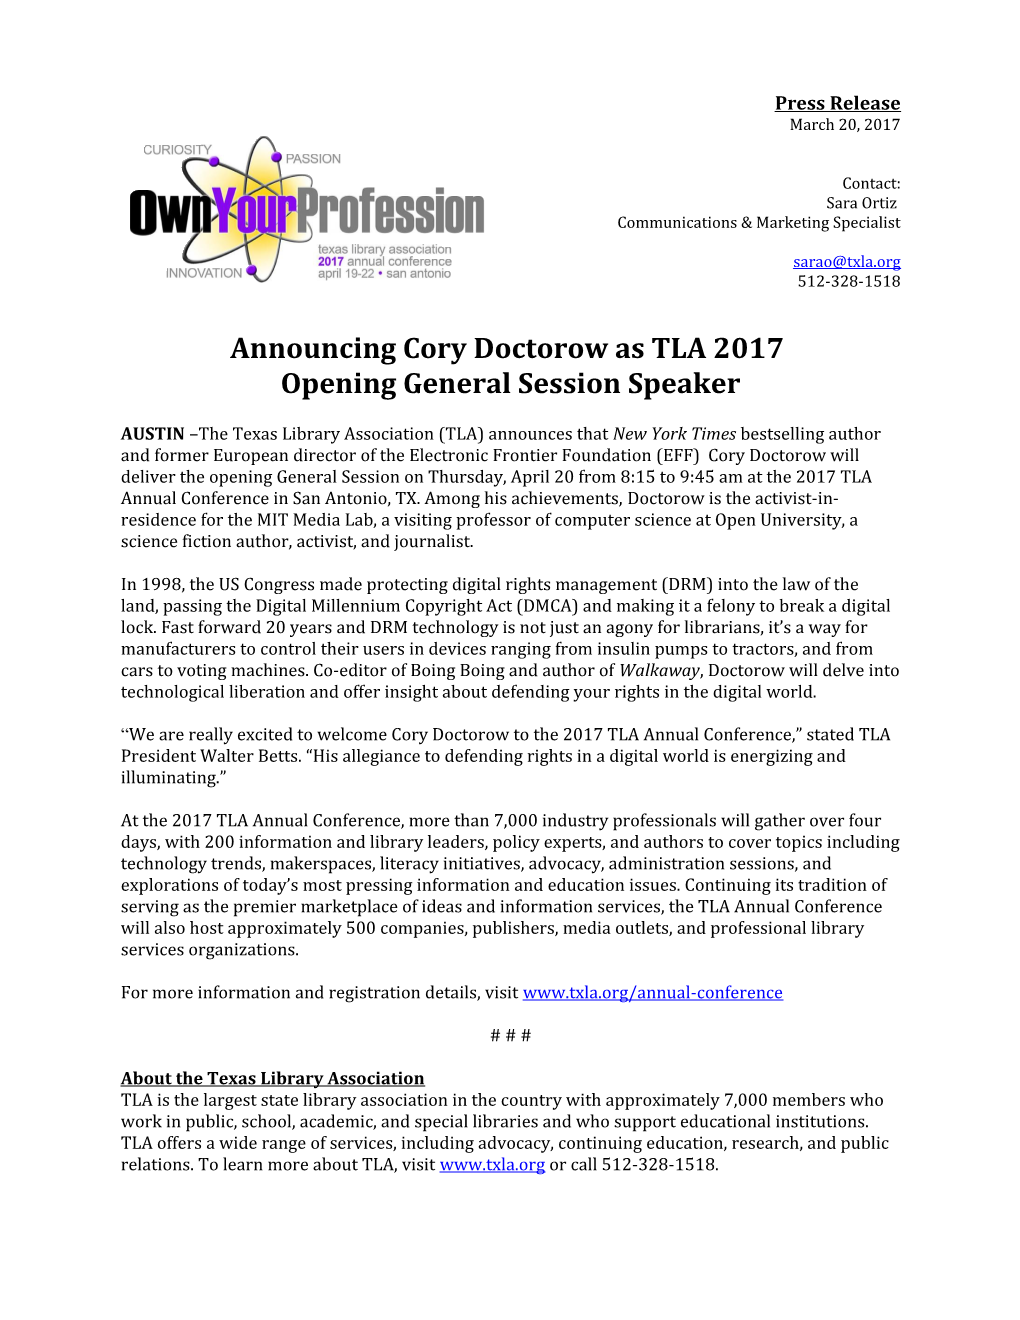 Announcing Cory Doctorow As TLA 2017 Opening General Session Speaker